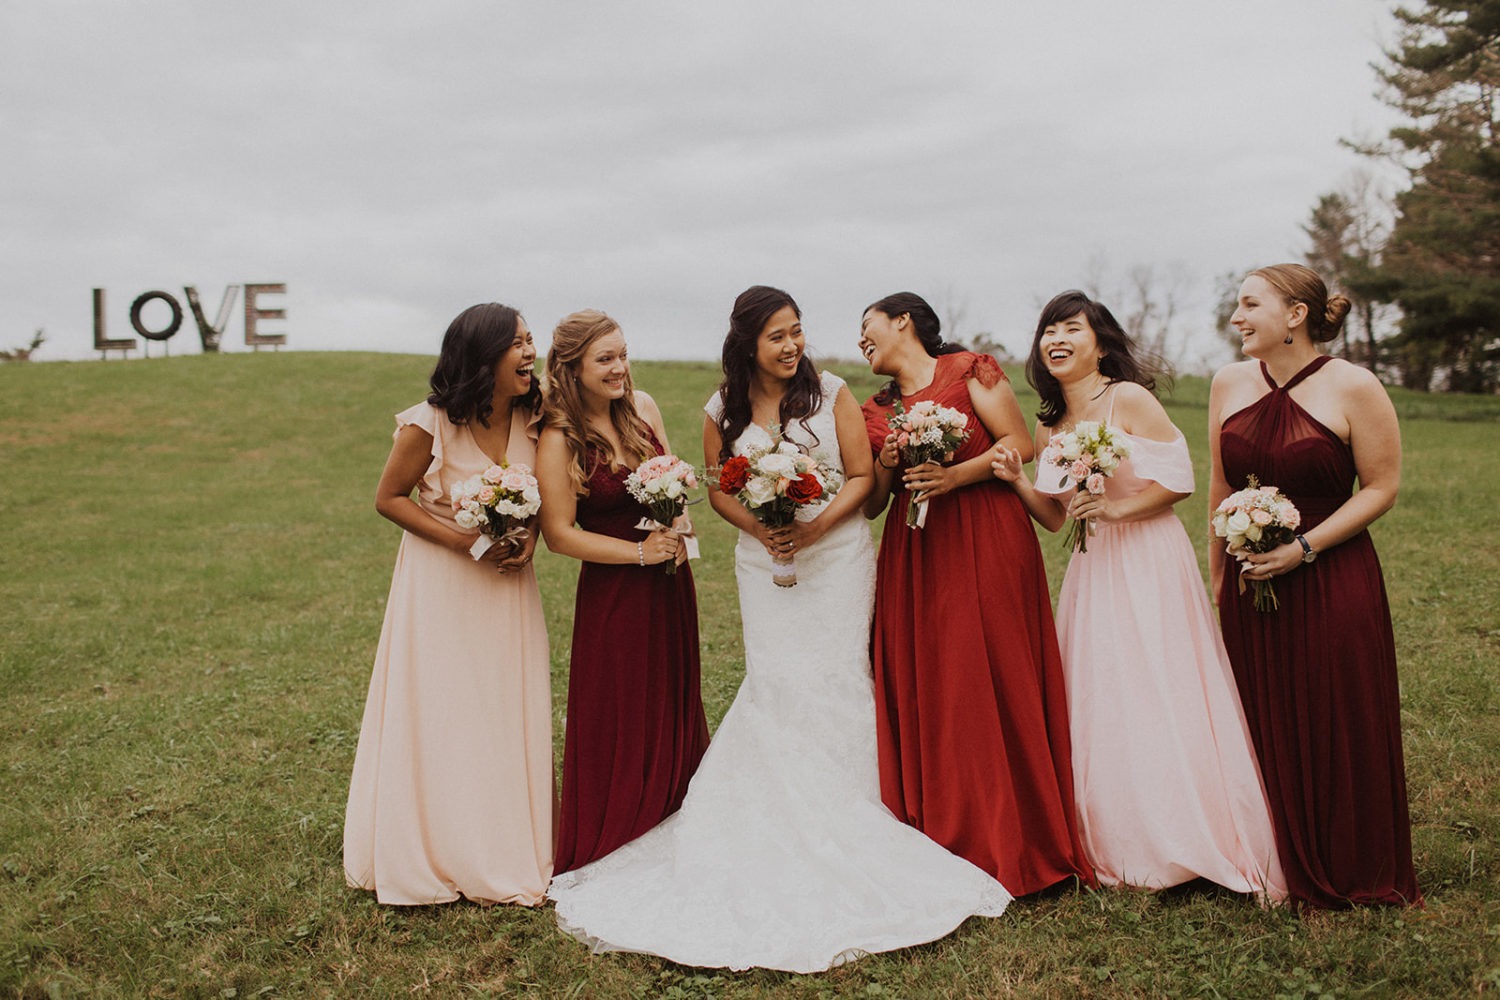 Bridesmaids stand in field with bride at Virginia outdoor wedding.